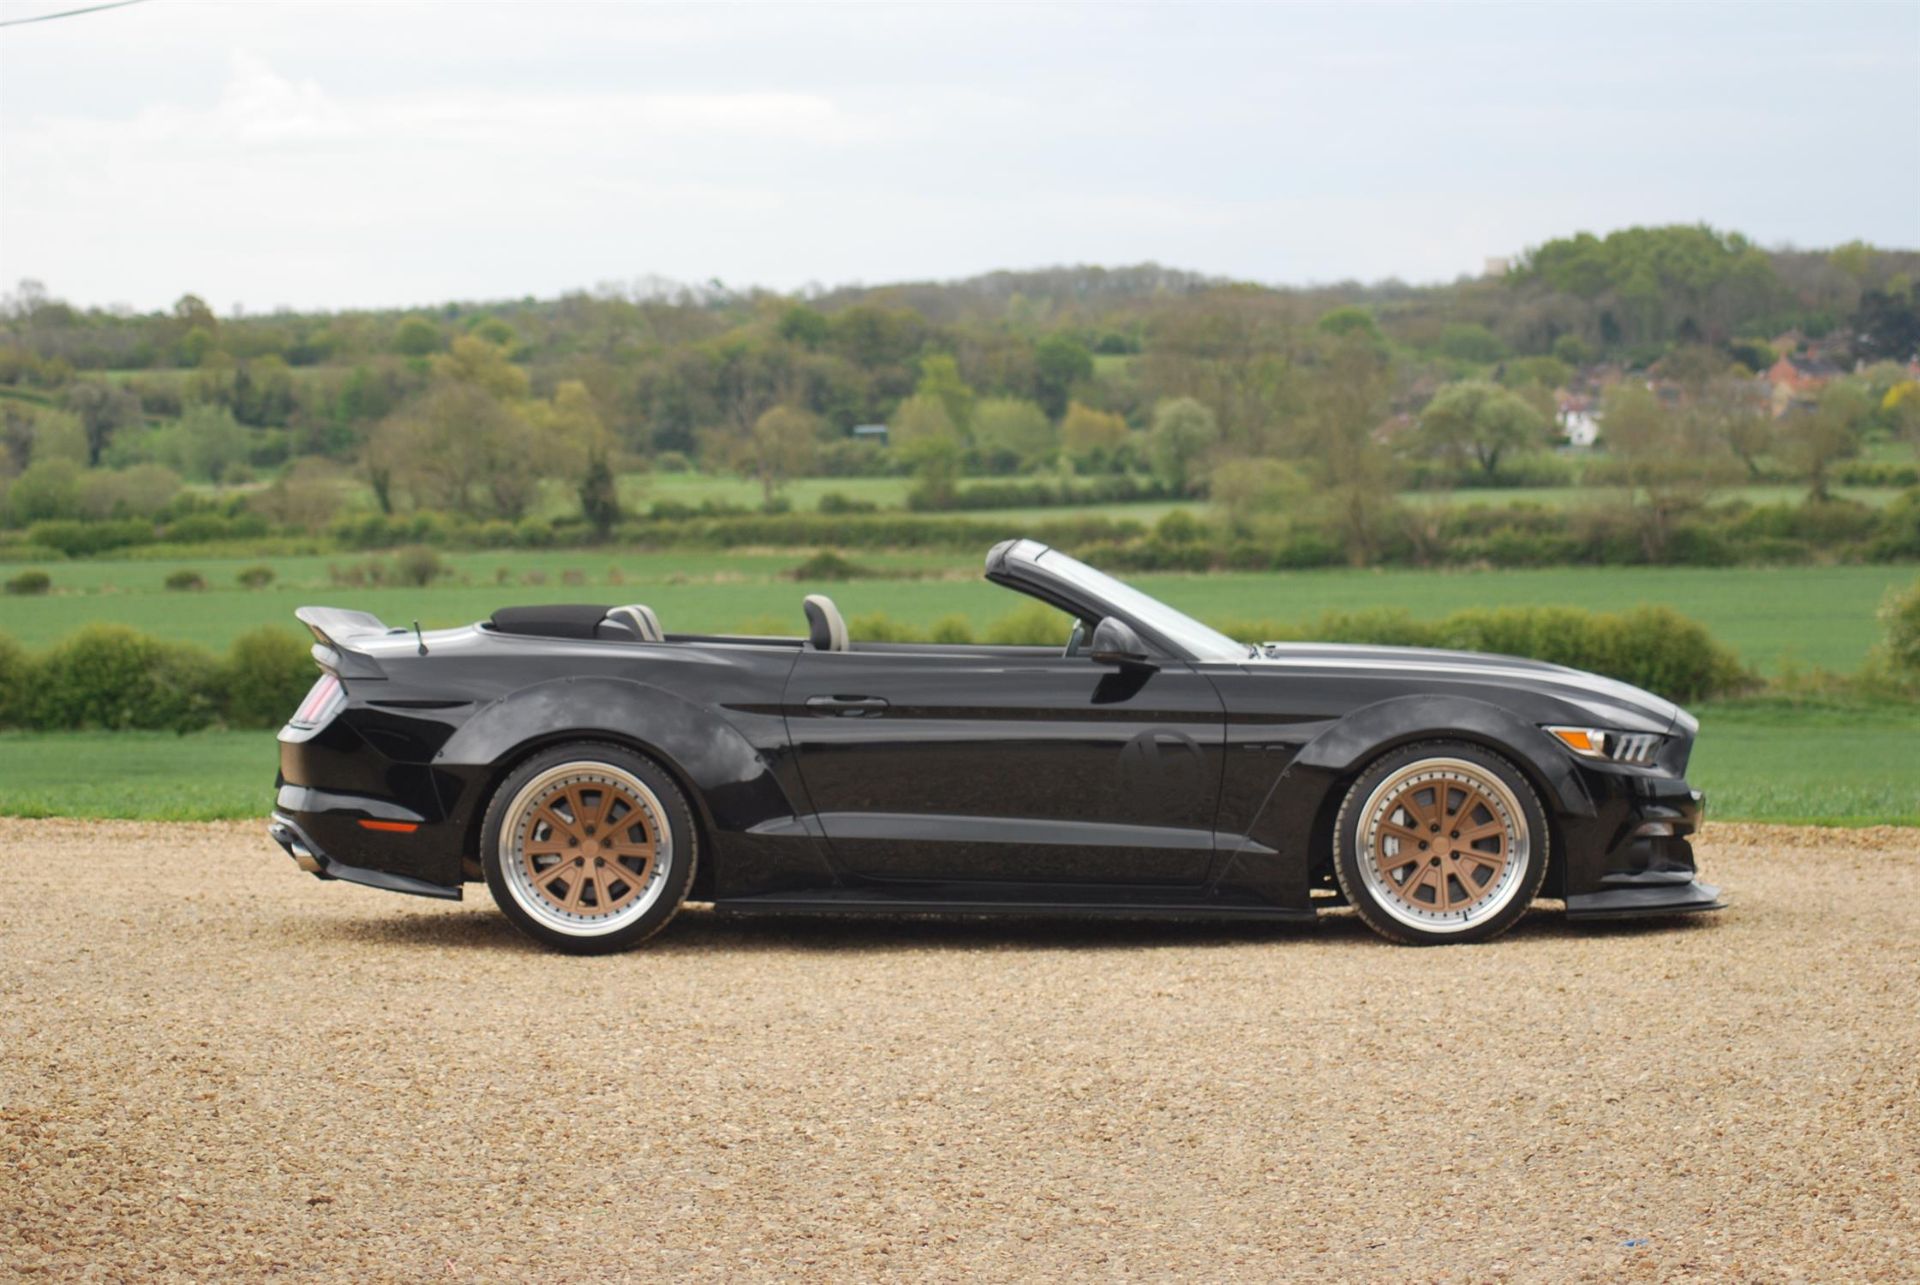 2017 Ford Mustang 5.0-Litre V8 GT Convertible 'Liberty Walk' - Image 5 of 10